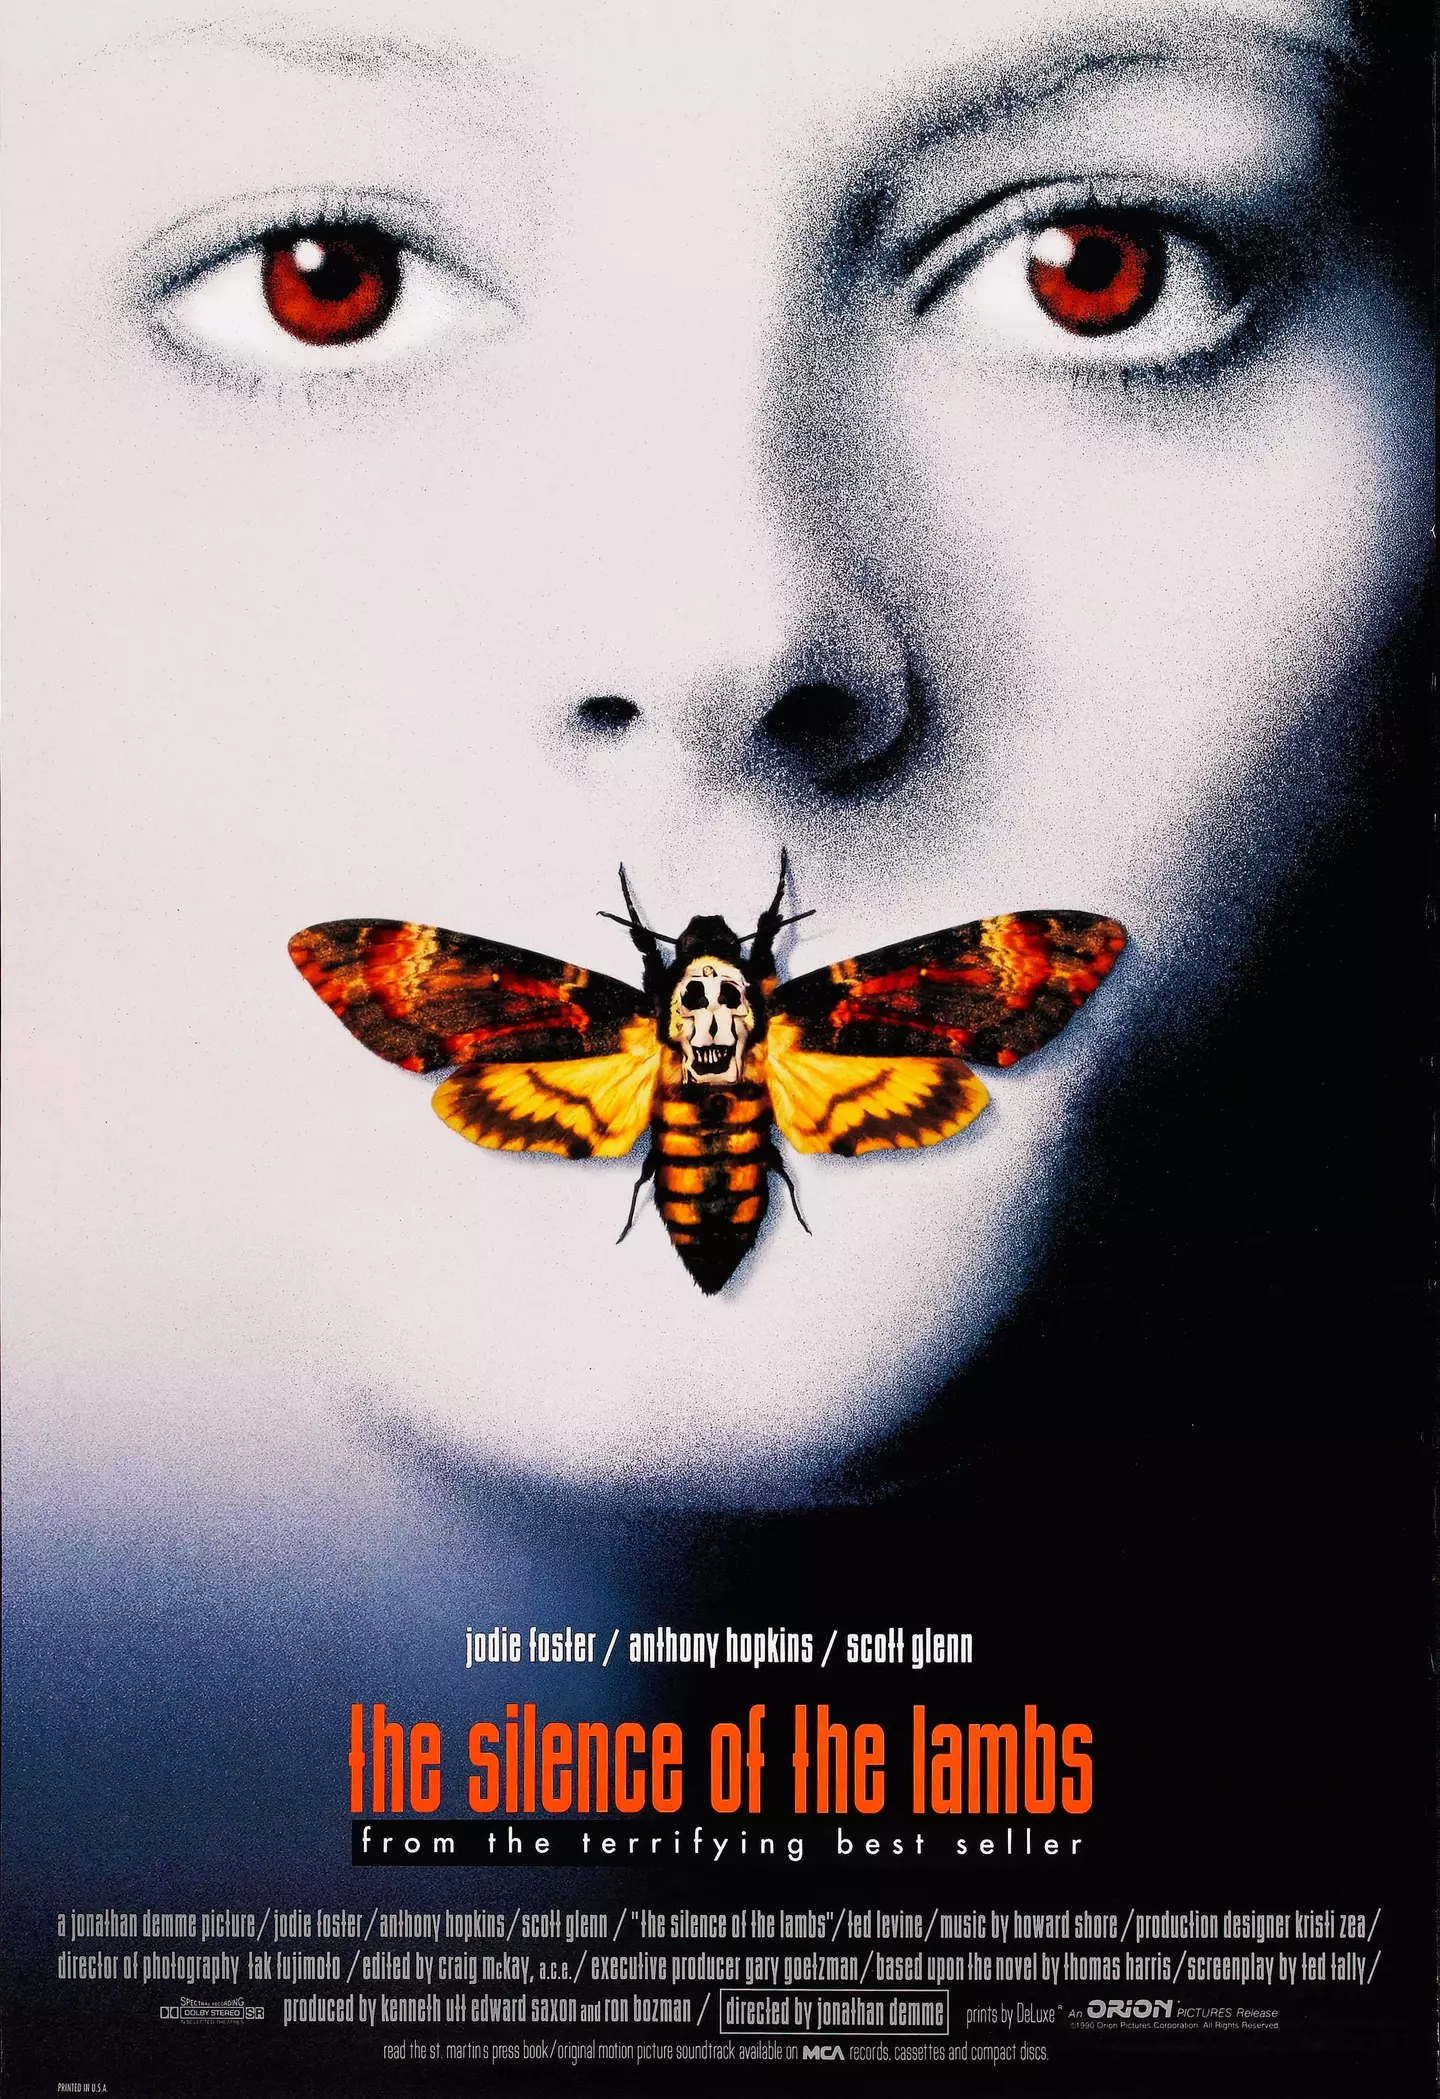 The death’s-head hawkmoth featured in the Silence of the Lambs.